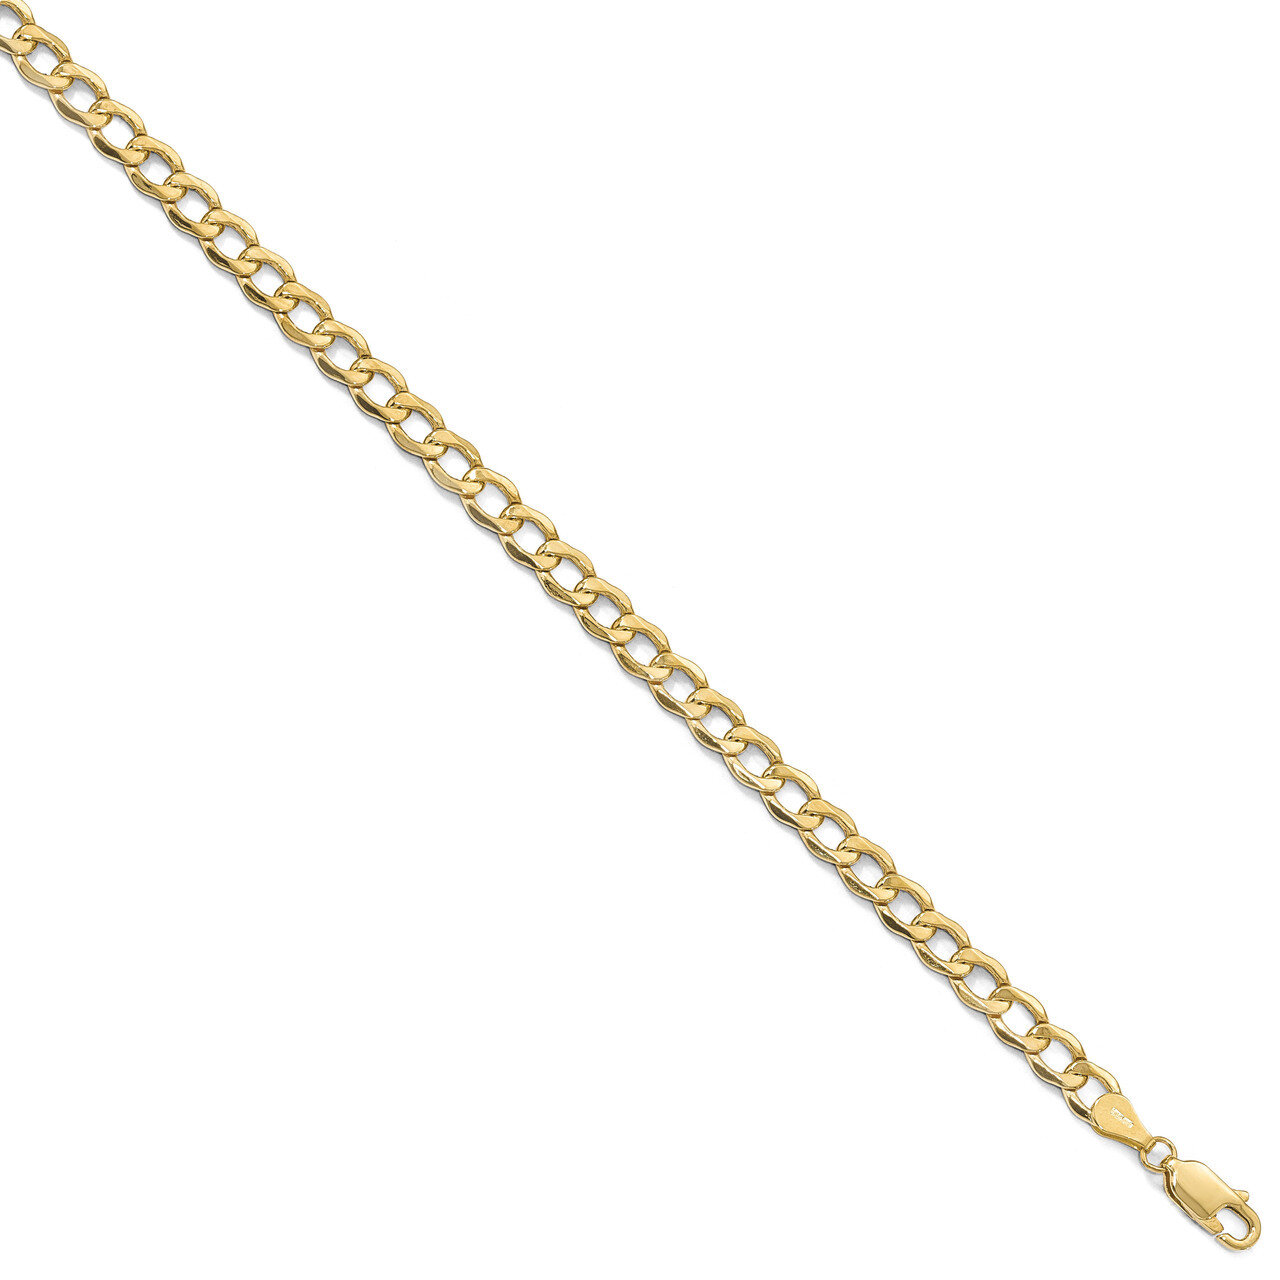 5.25mm Semi-Solid Curb Link Chain 16 Inch 10k Gold HB-8241-16